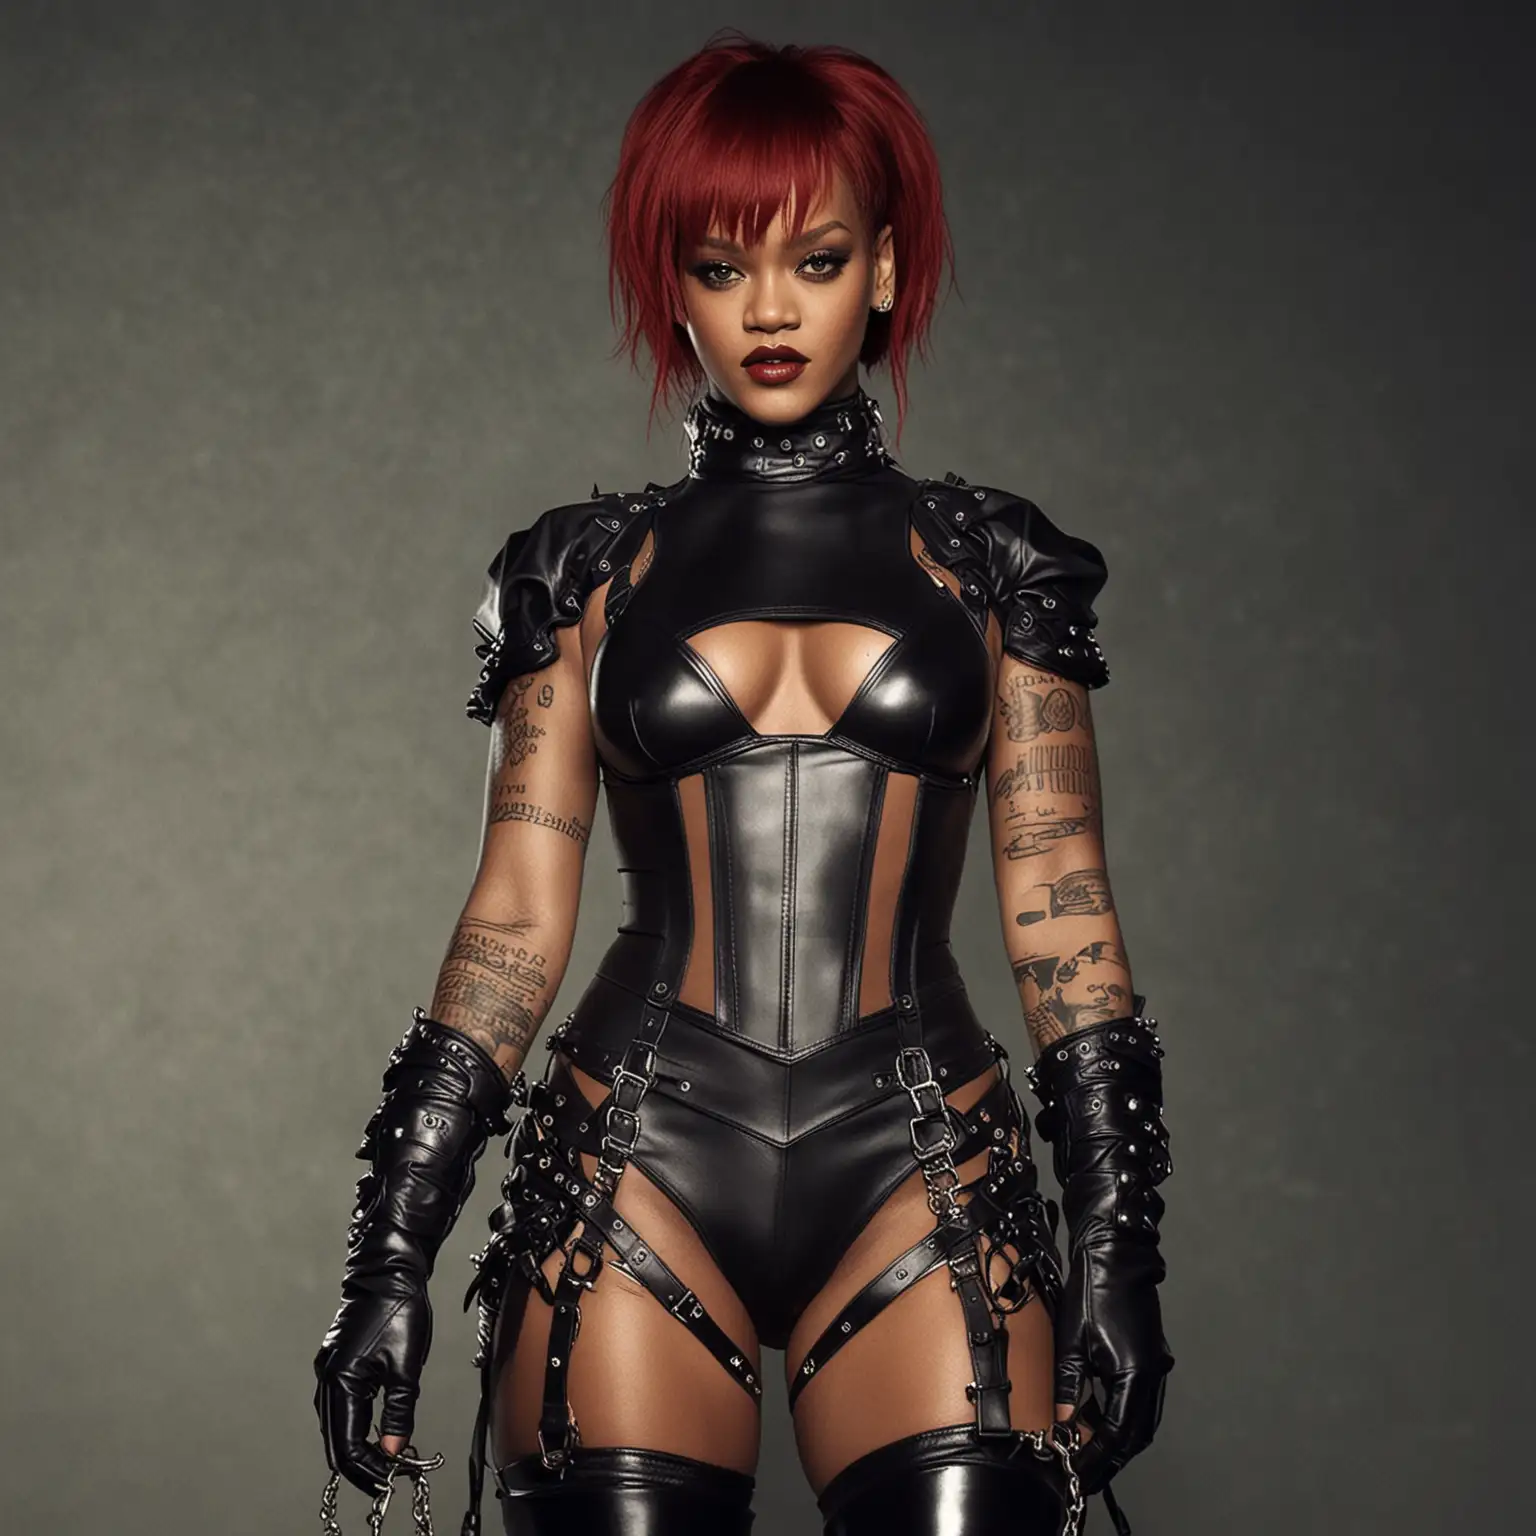 Rihanna Dominatrix Portrait Sultry Empowerment in Leather